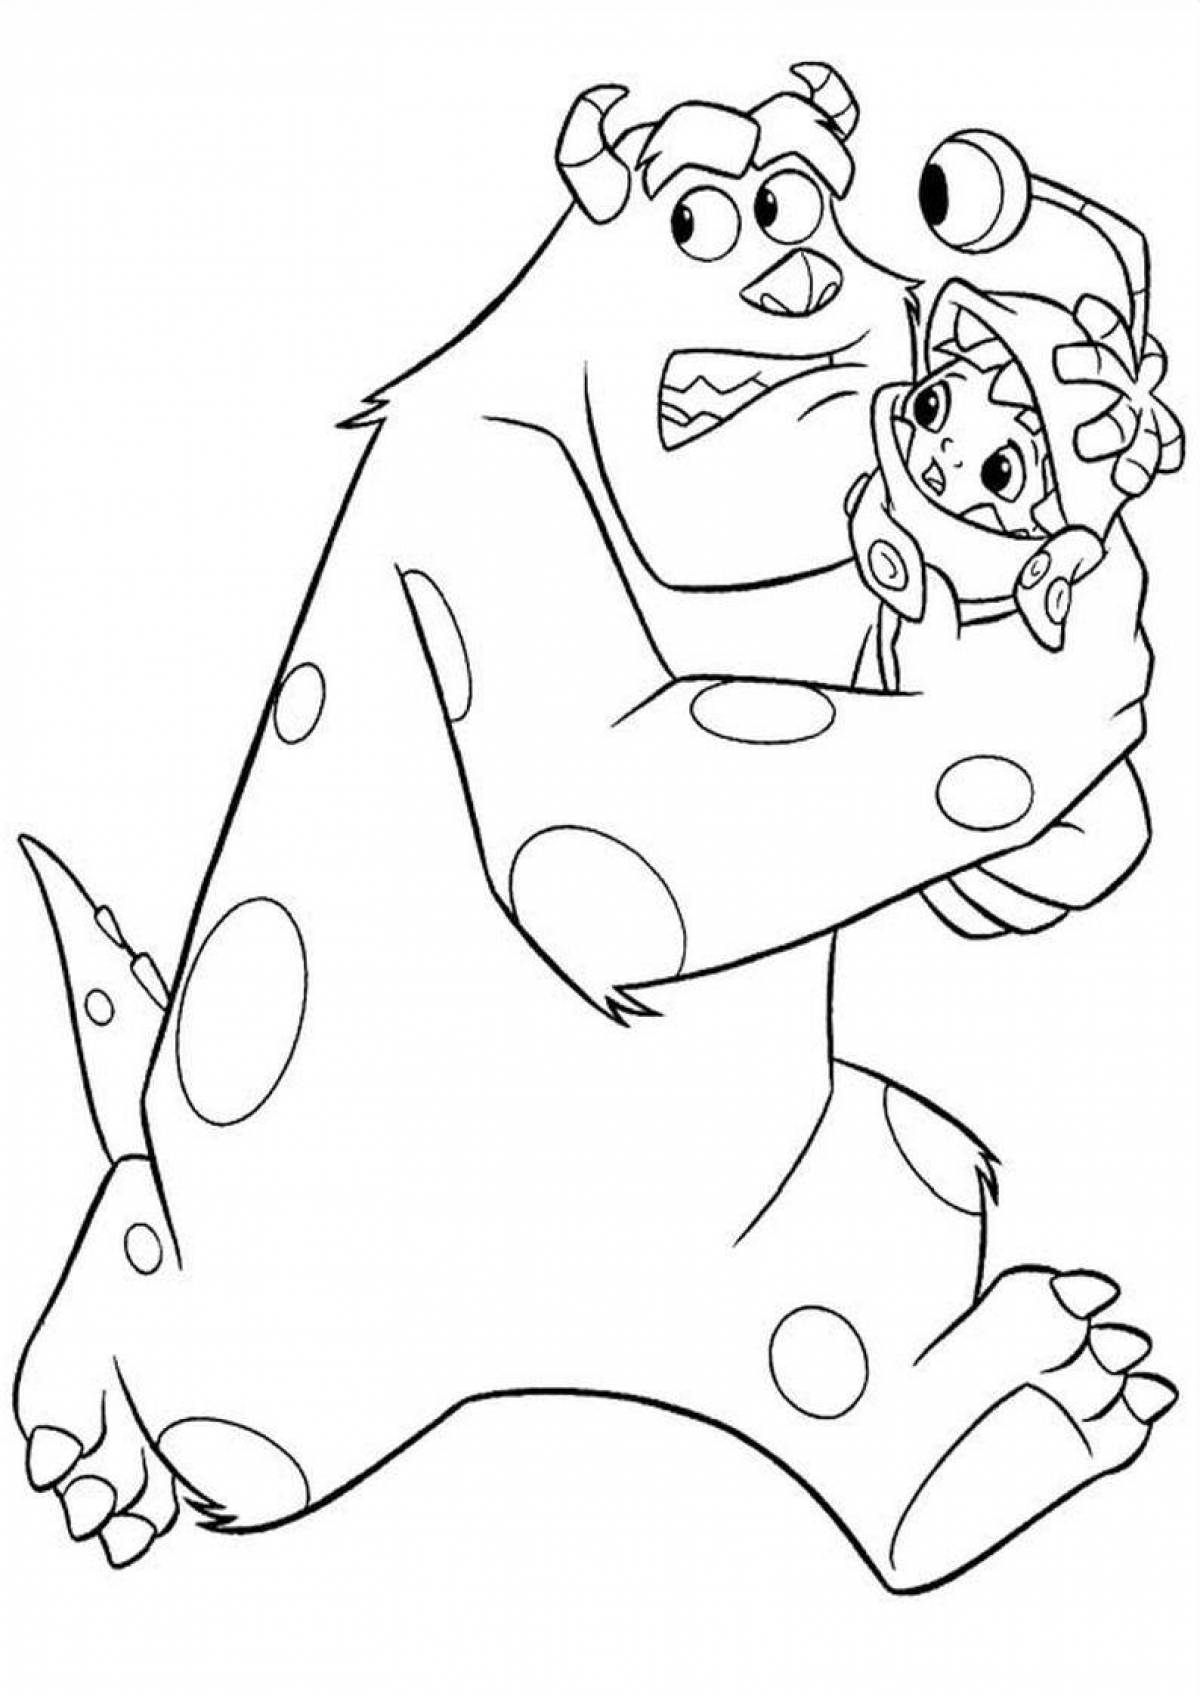 Colorful sally and boo coloring page